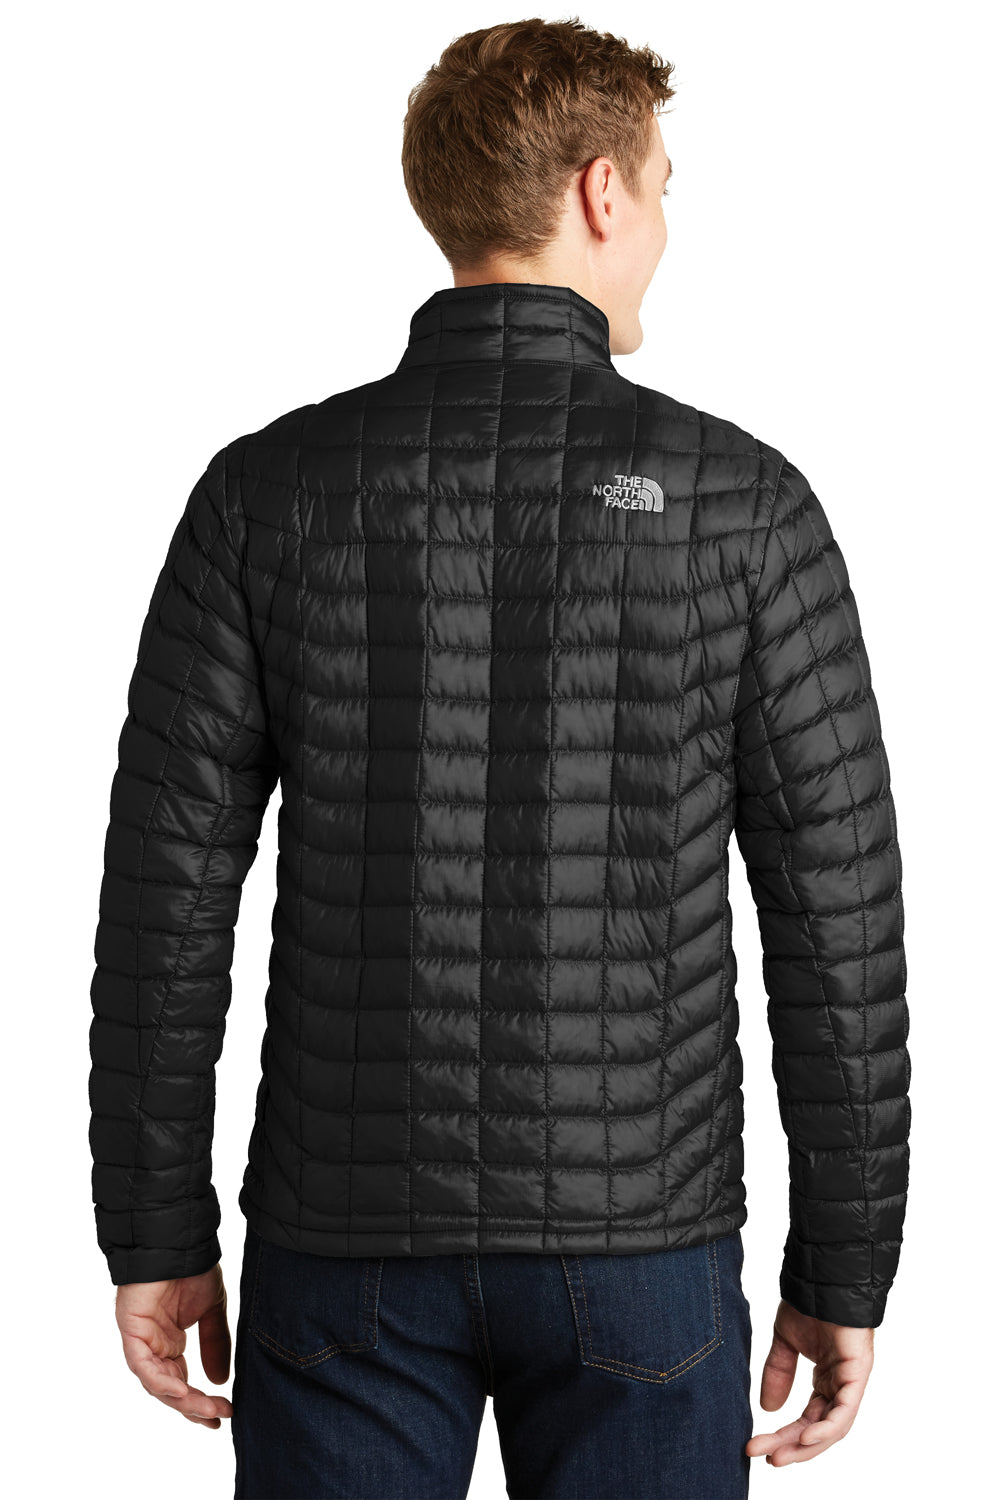 The North Face NF0A3LH2 Mens ThermoBall Trekker Water Resistant Full Zip Jacket Matte Black Back